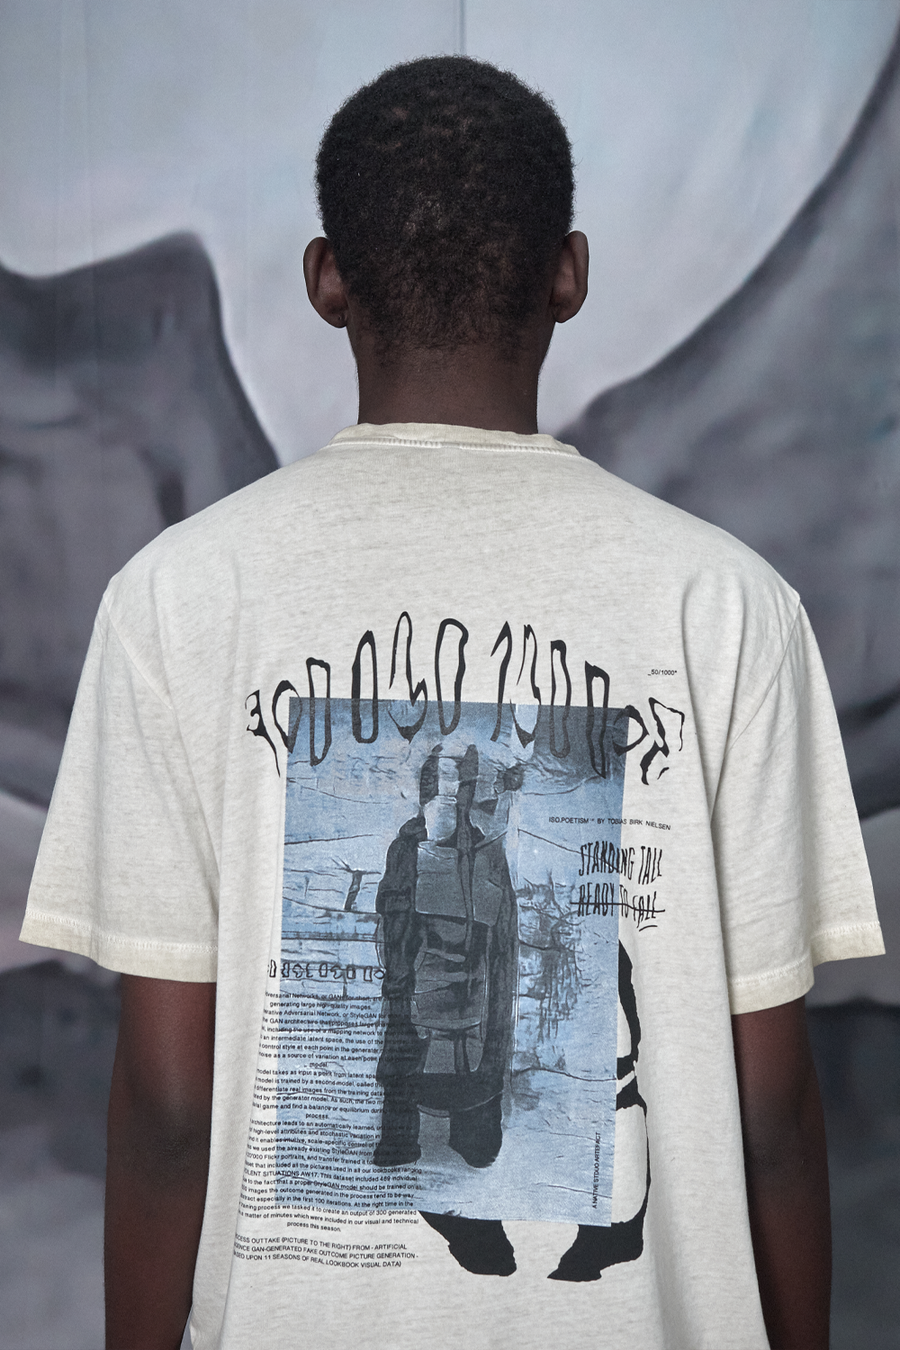 Buy the Iso Poetism Giriya 2 T-Shirt W/ Serigraphy Front/Back Print in Sand at Intro. Spend £100 for free UK delivery. Official stockists. We ship worldwide.